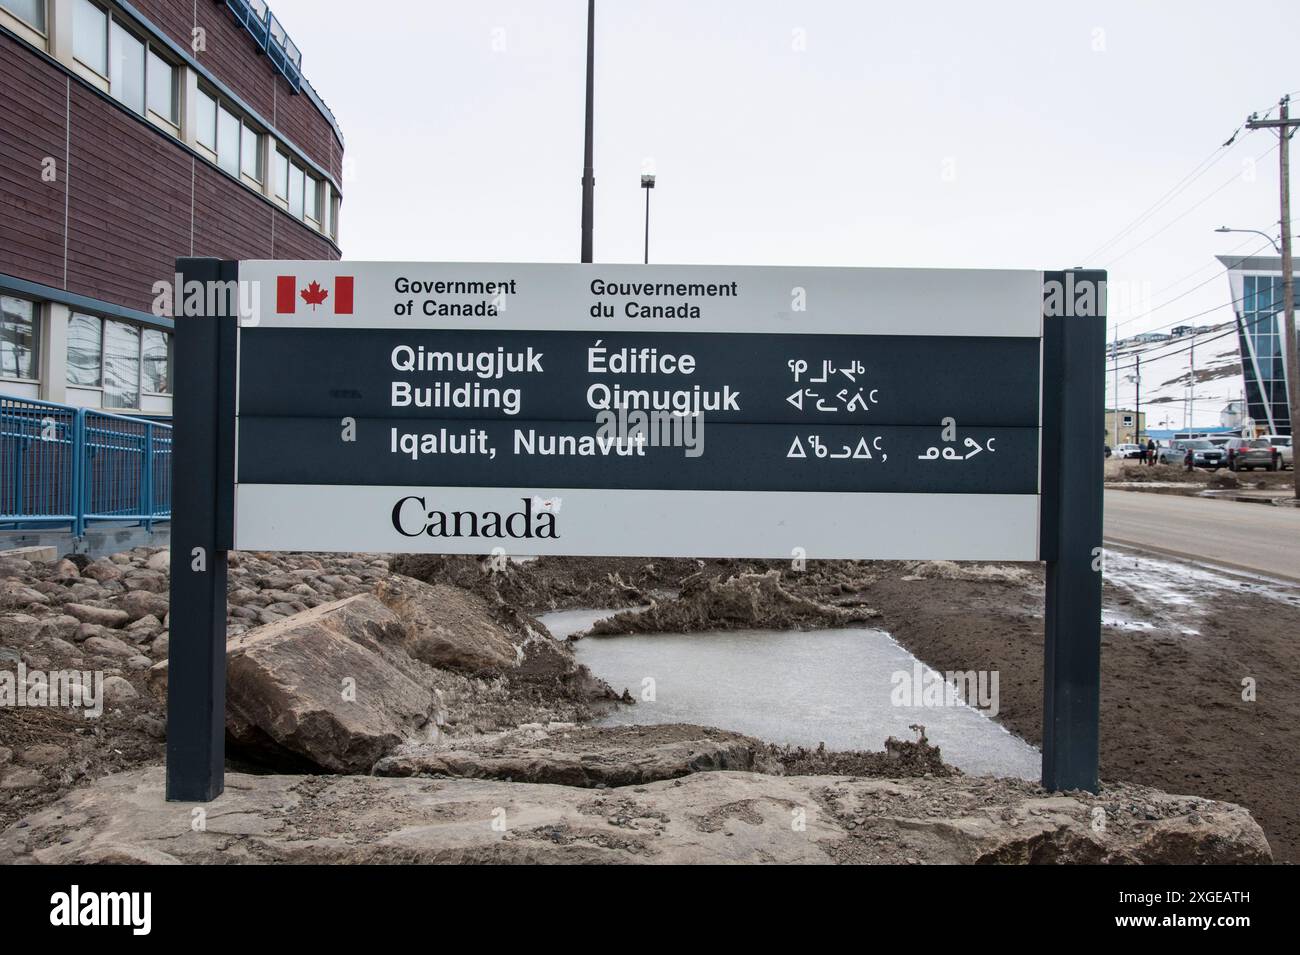 Multilingual Qimugjuk federal government building sign in English, French and Inuktitut on Federal Road in Iqaluit, Nunavut, Canada Stock Photo